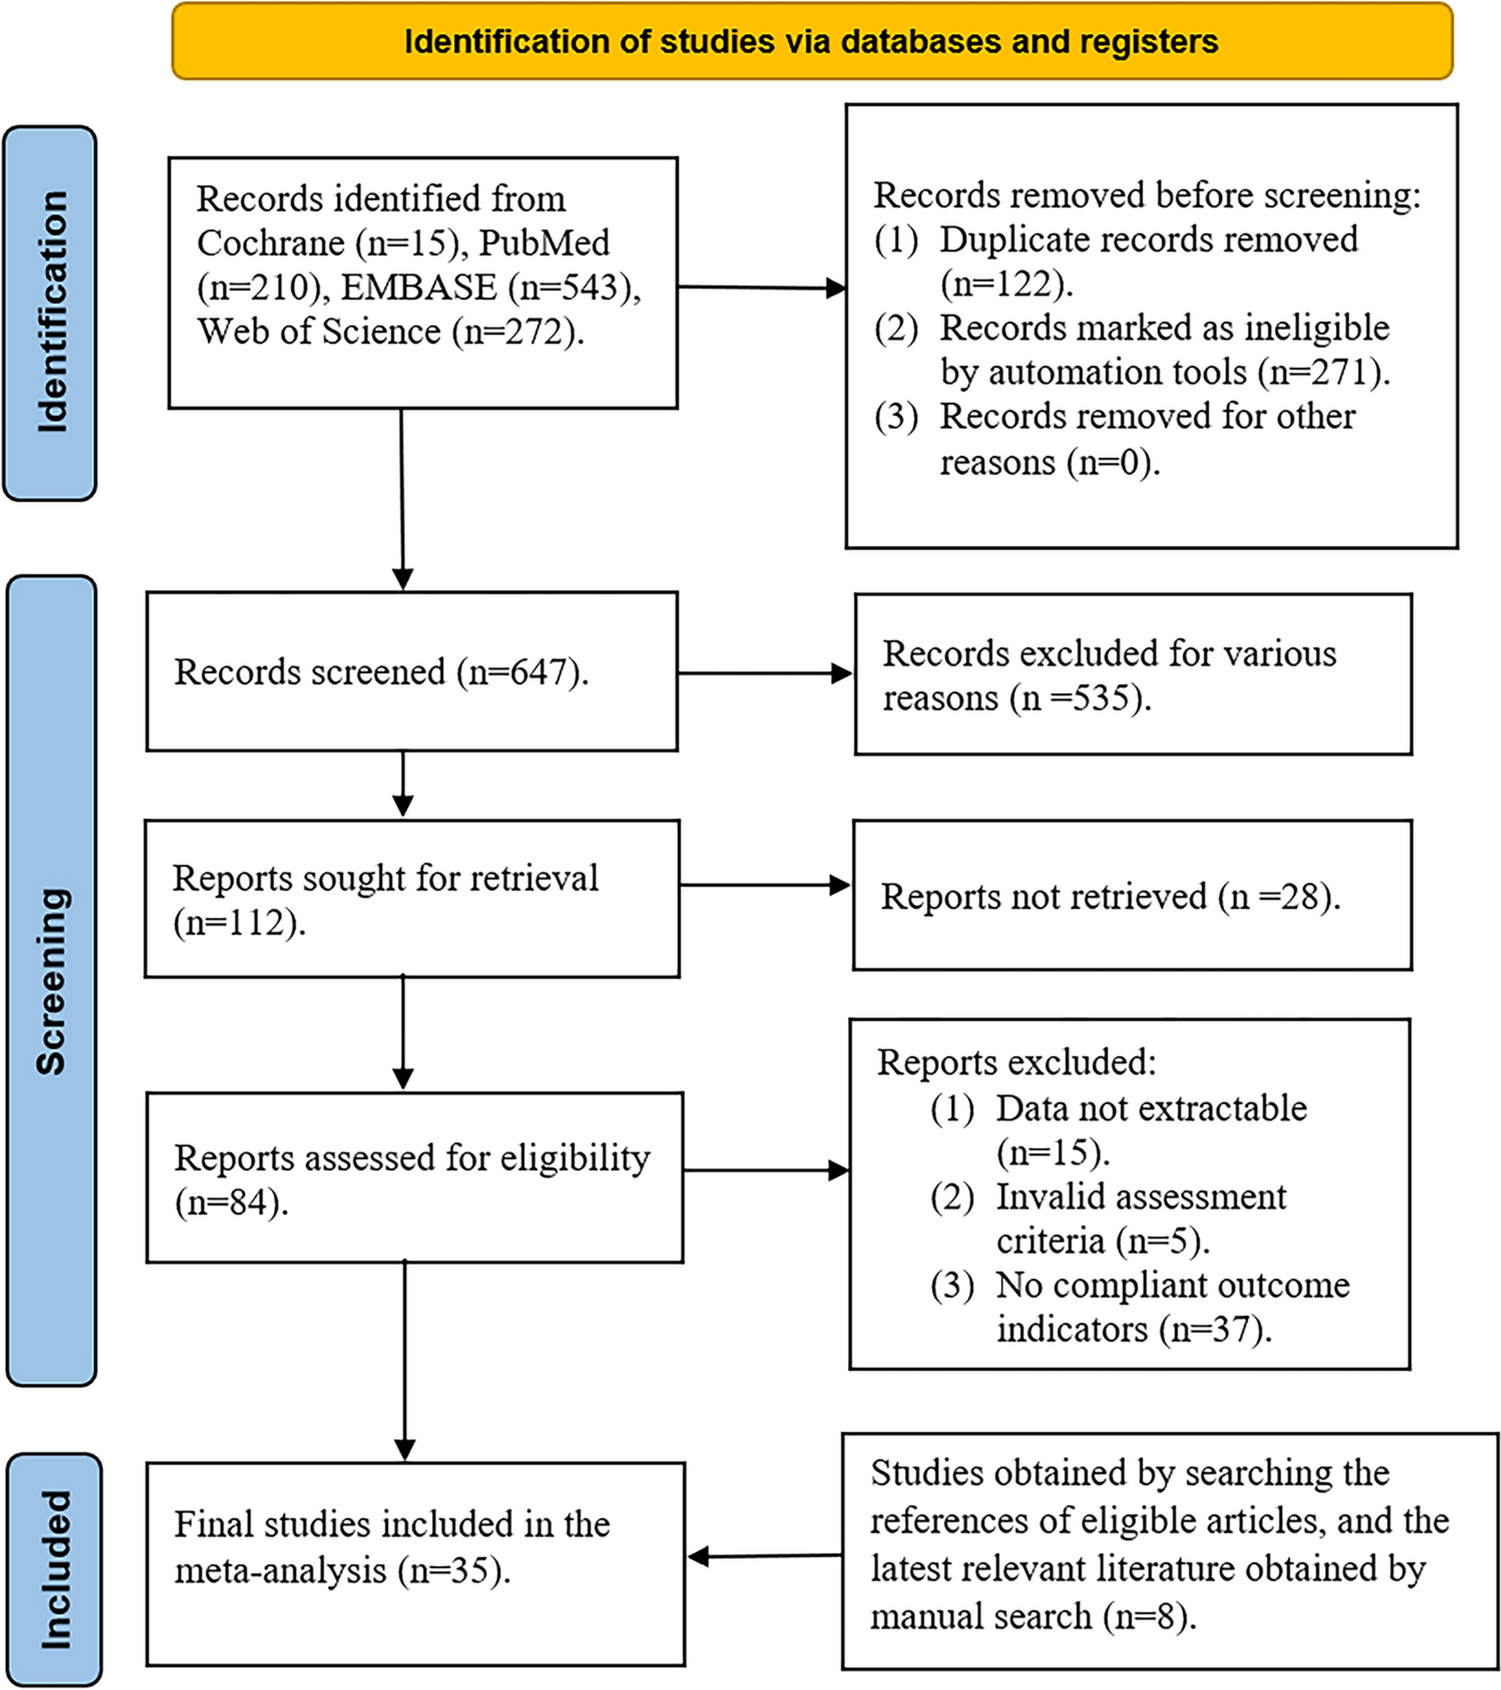 Association of physical weight statuses defined by body mass index (BMI) with molecular subtypes of premenopausal breast cancer: a systematic review and meta-analysis